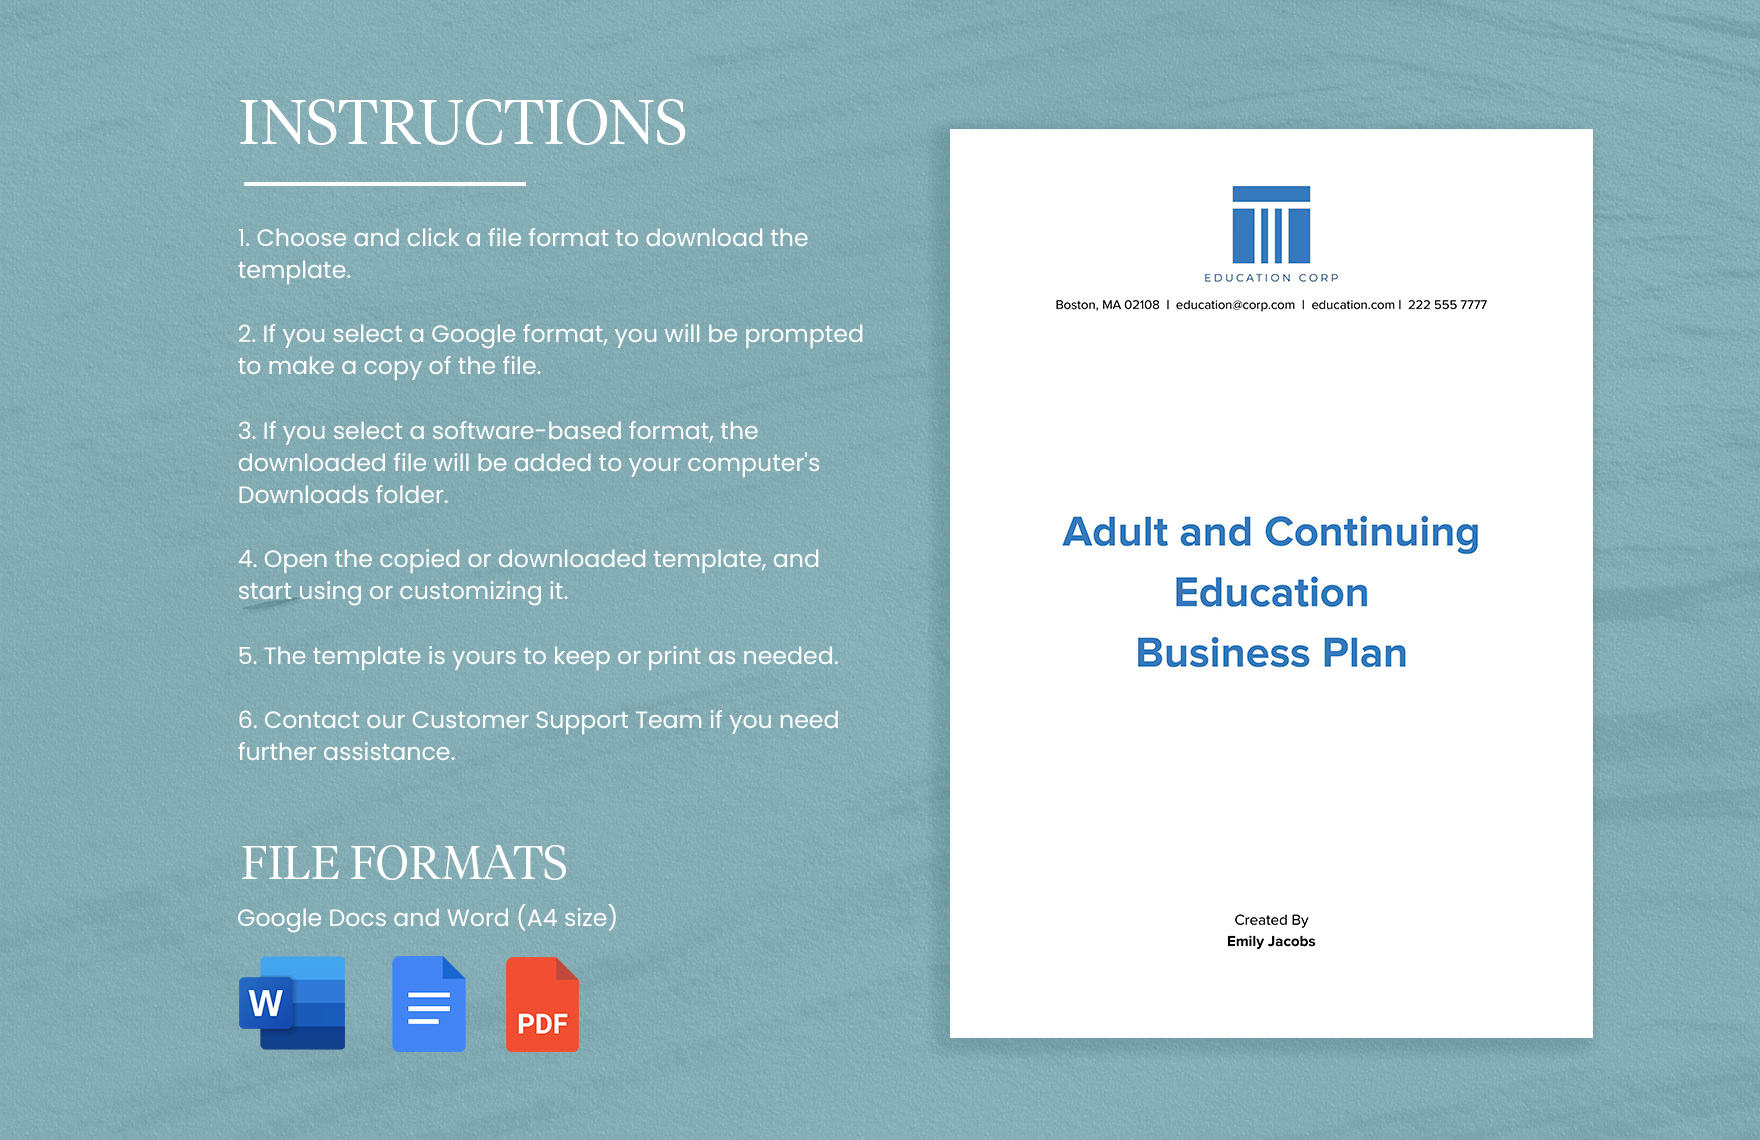 Adult and Continuing Education Business Plan Template